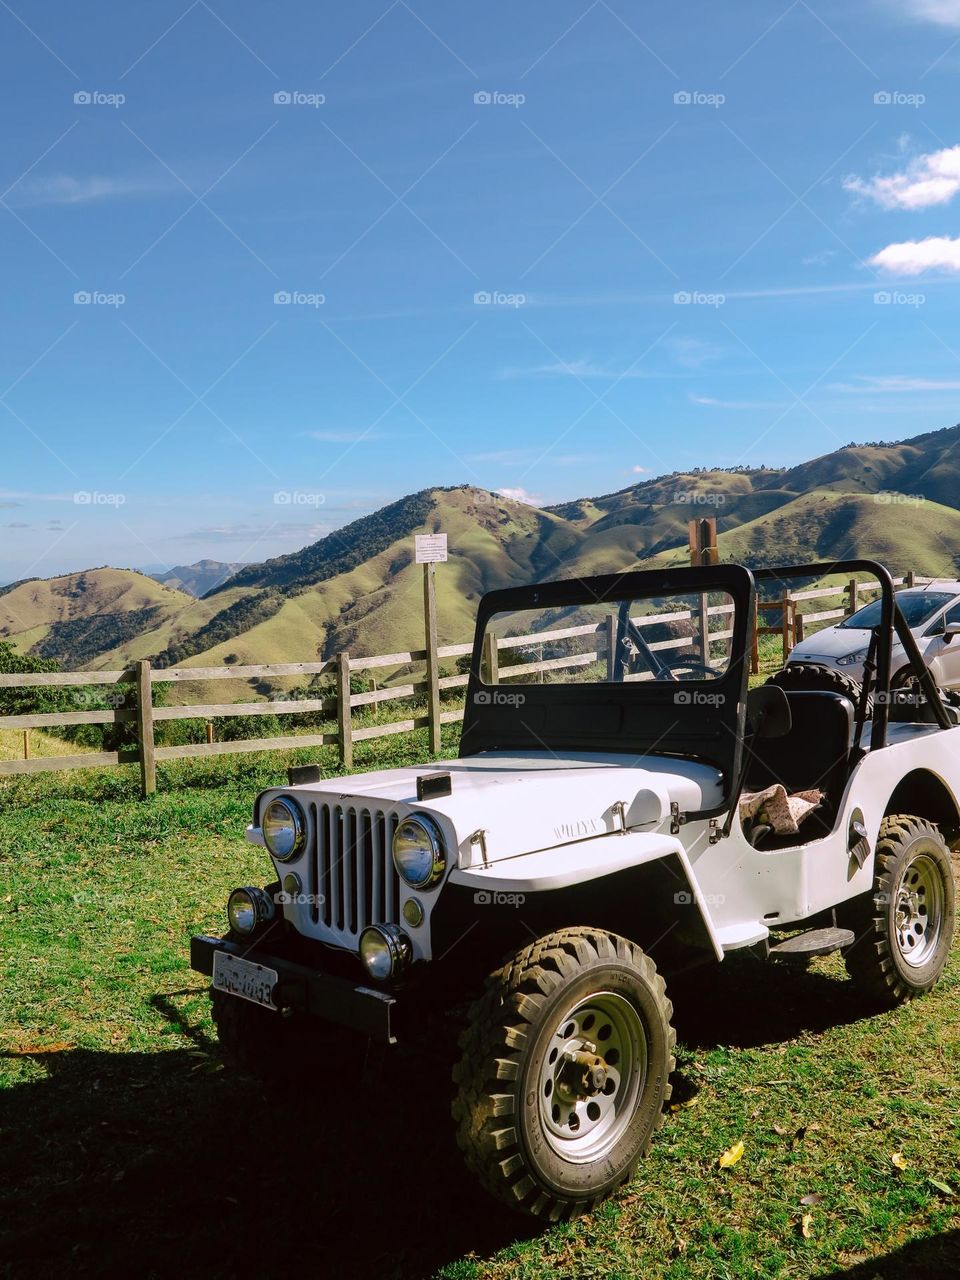 White Jeep, on a beautiful mountain landscape. A beautiful blue sky and green grasslands add color to the composition.